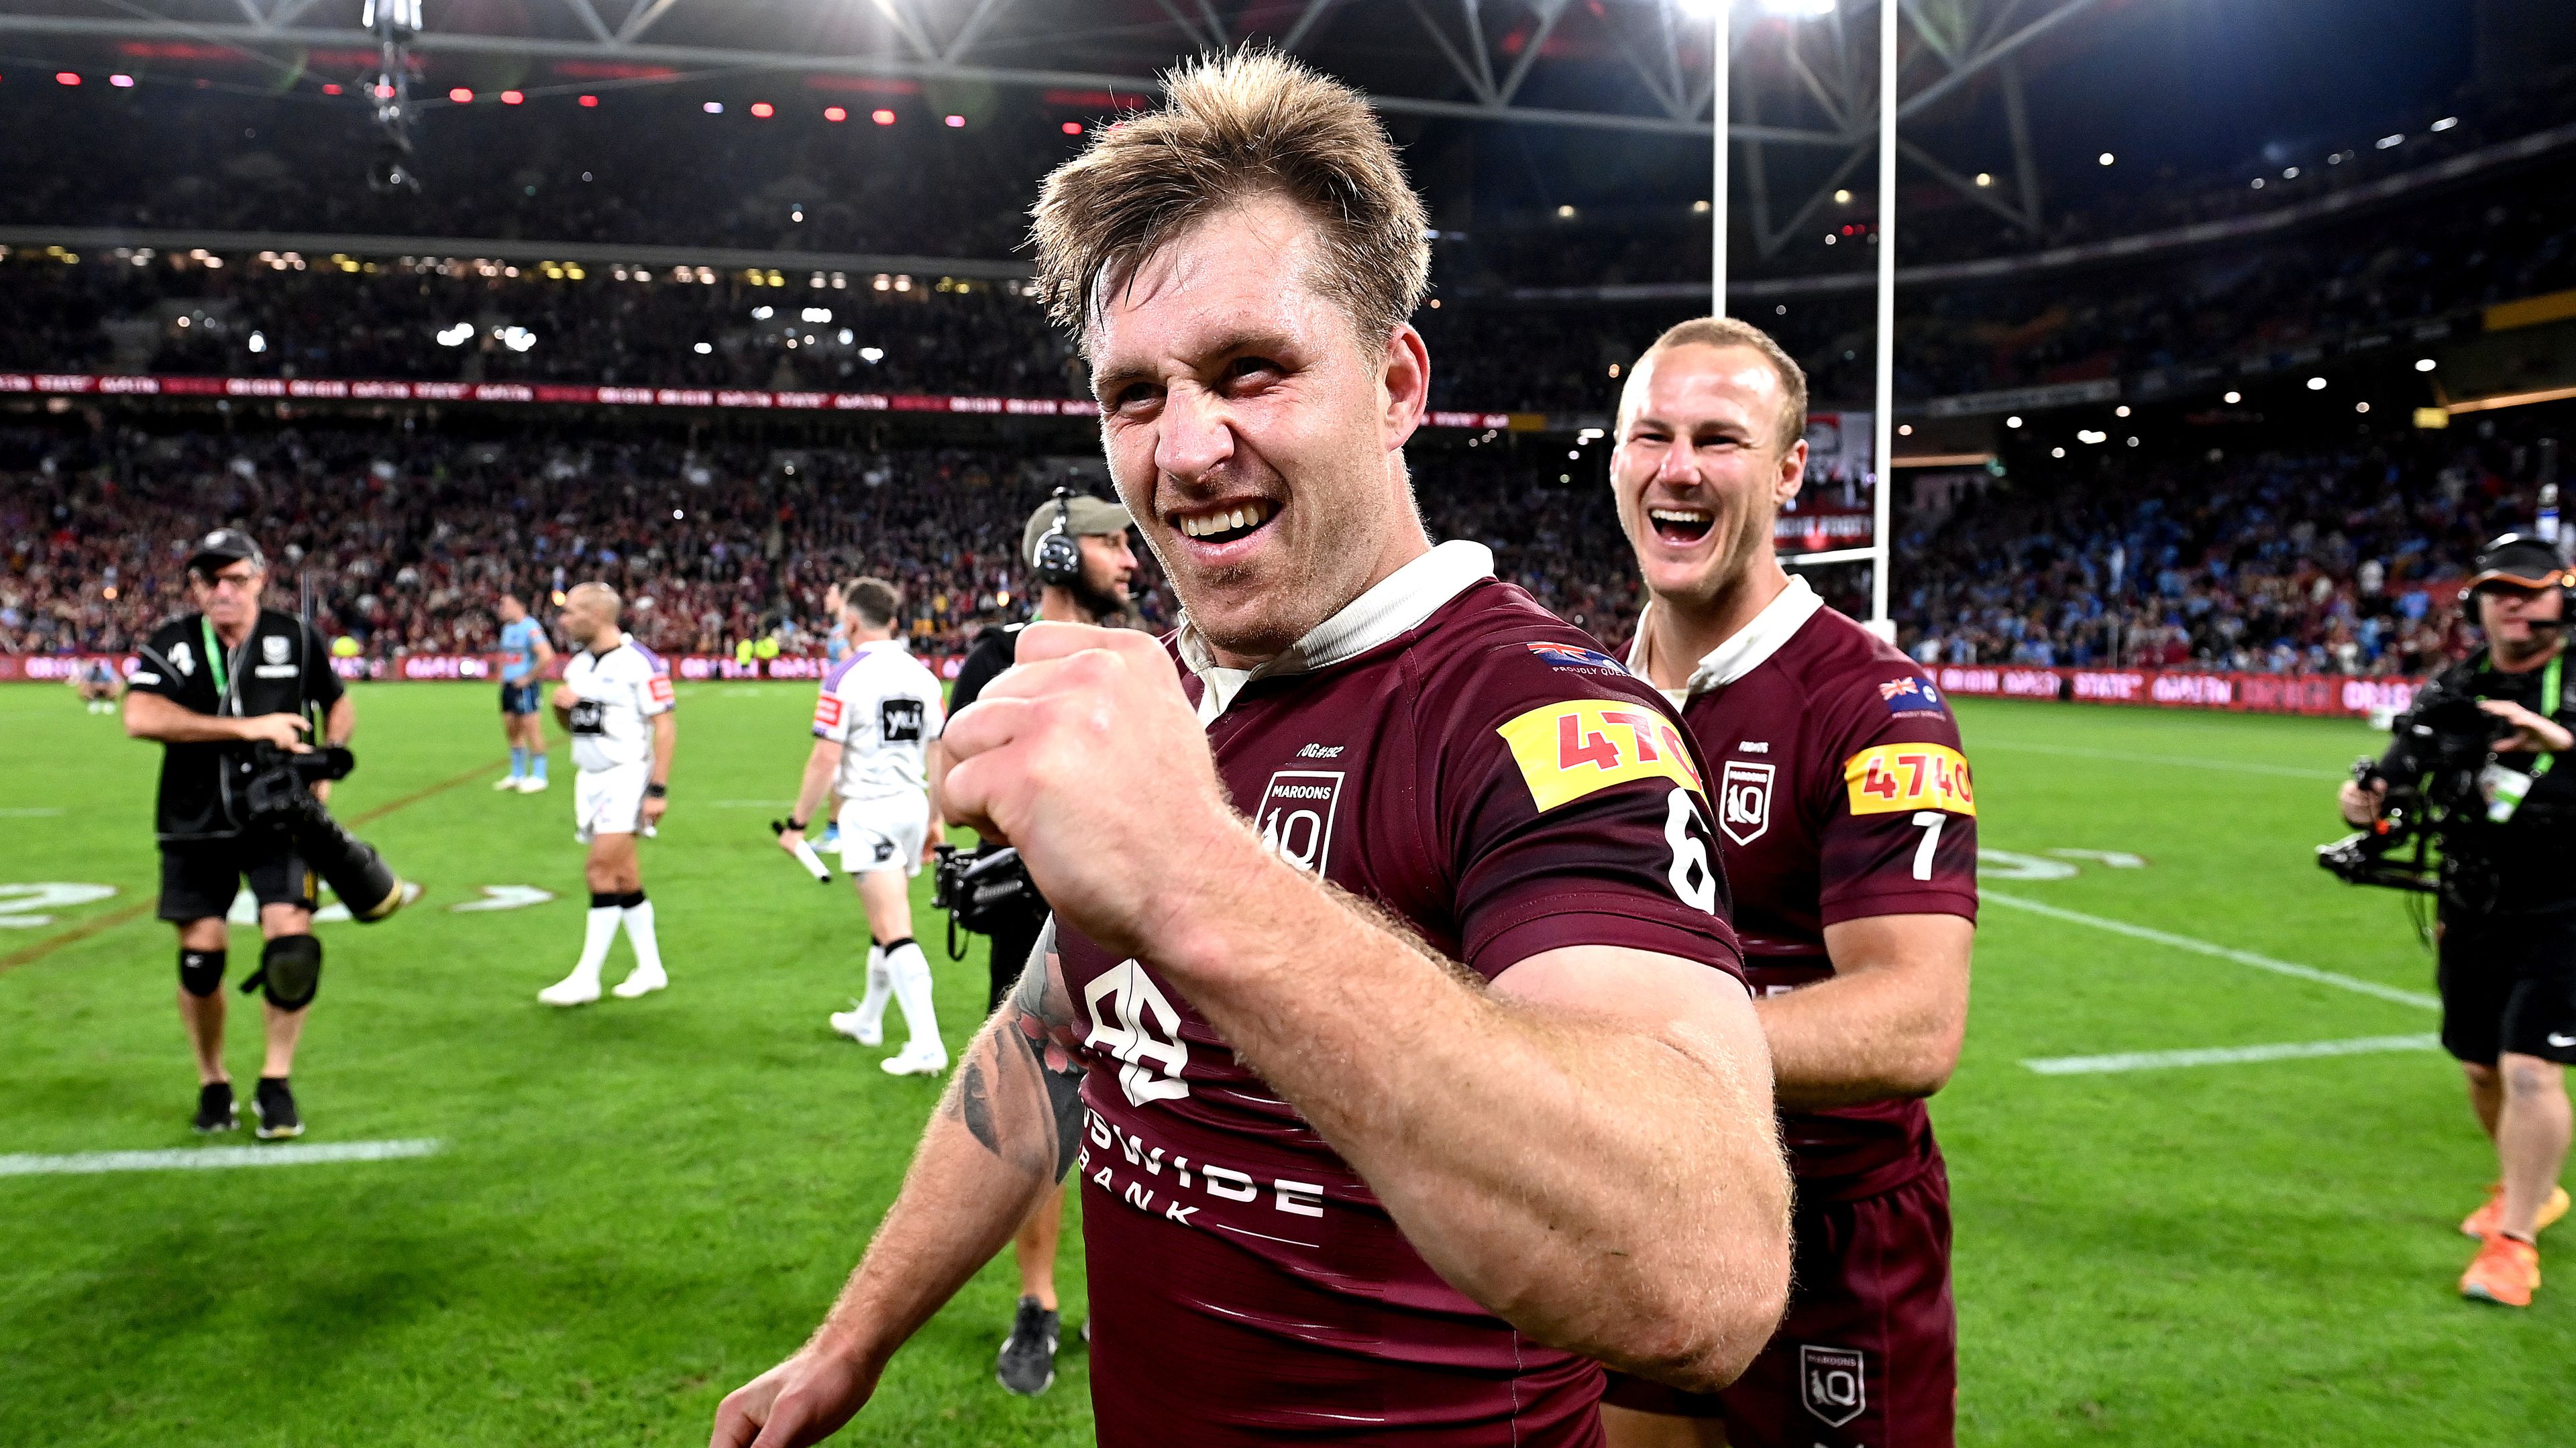 BRISBANE, AUSTRALIA - JUNE 21: Cameron Munster and Daly Cherry-Evans of Queensland celebrate victory after game two of the State of Origin series between the Queensland Maroons and the New South Wales Blues at Suncorp Stadium on June 21, 2023 in Brisbane, Australia. (Photo by Bradley Kanaris/Getty Images)